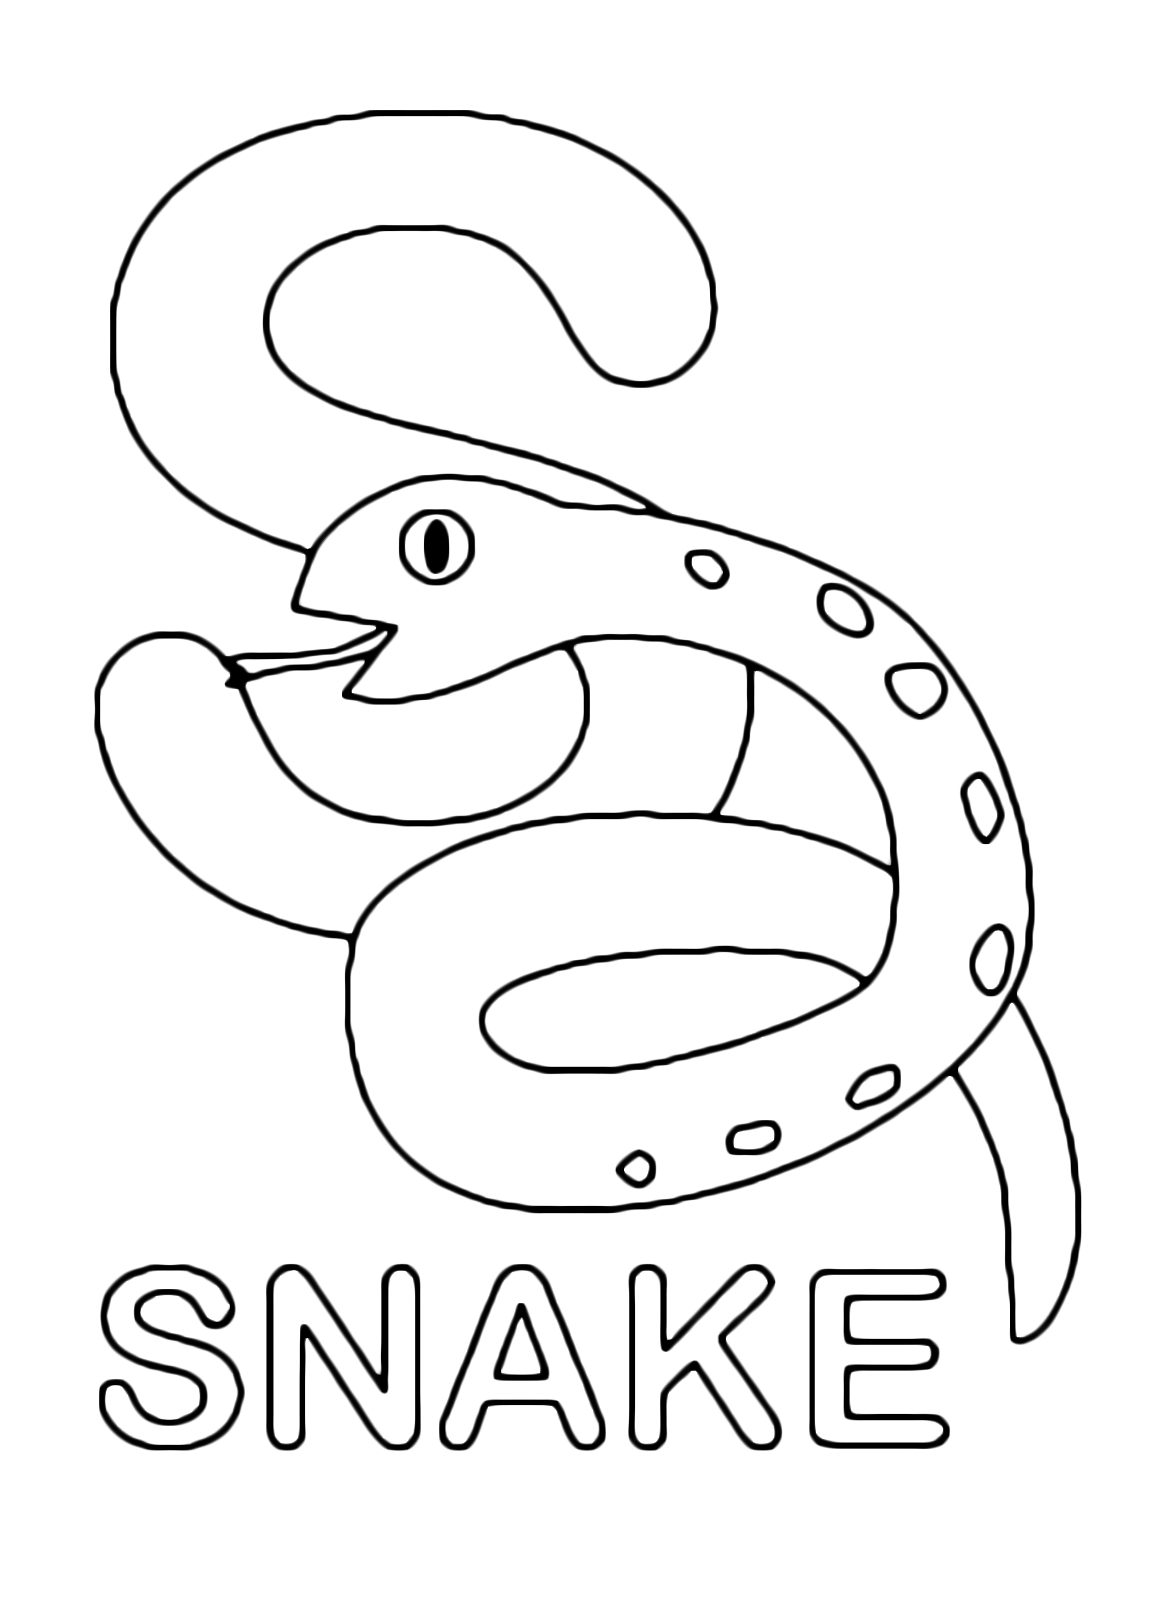 Letters and numbers - S for snake uppercase letter